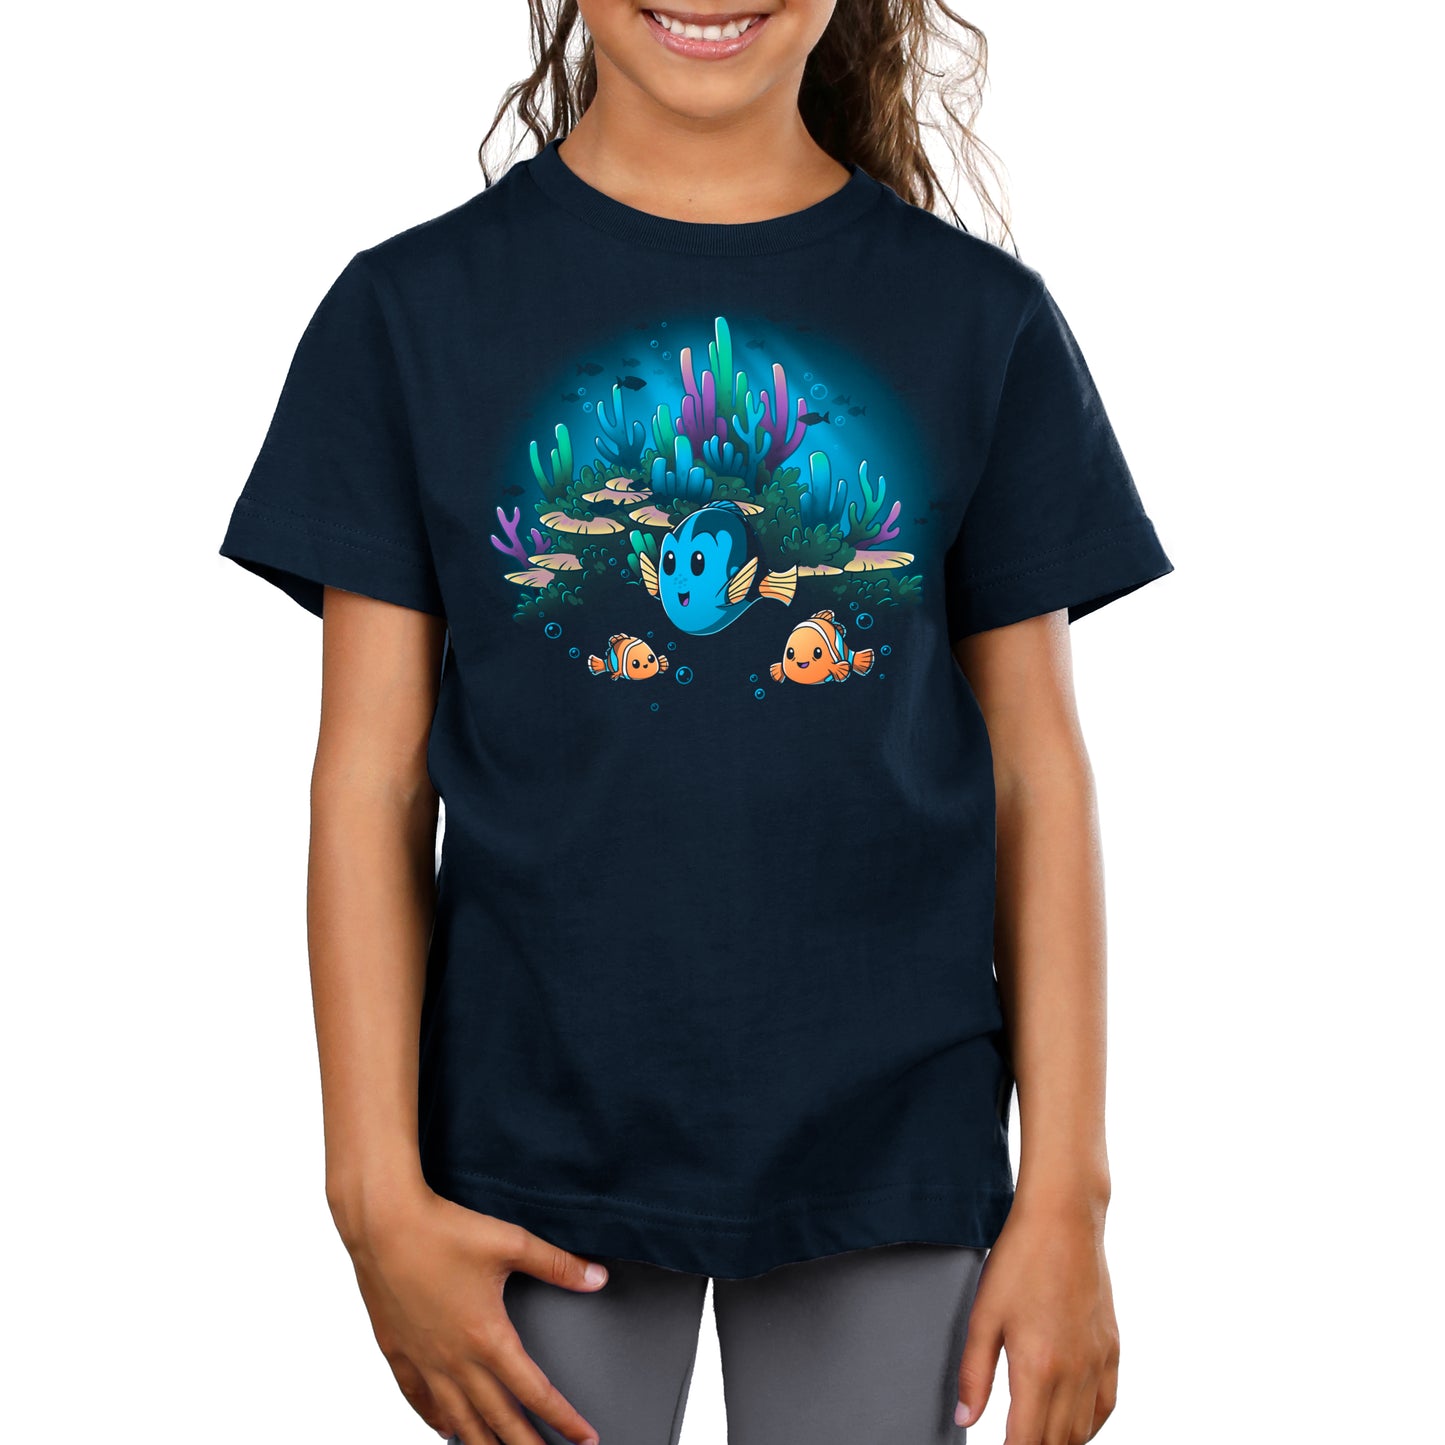 A girl wearing a navy t-shirt with an image of Nemo, from Pixar's Finding Nemo, in the ocean.